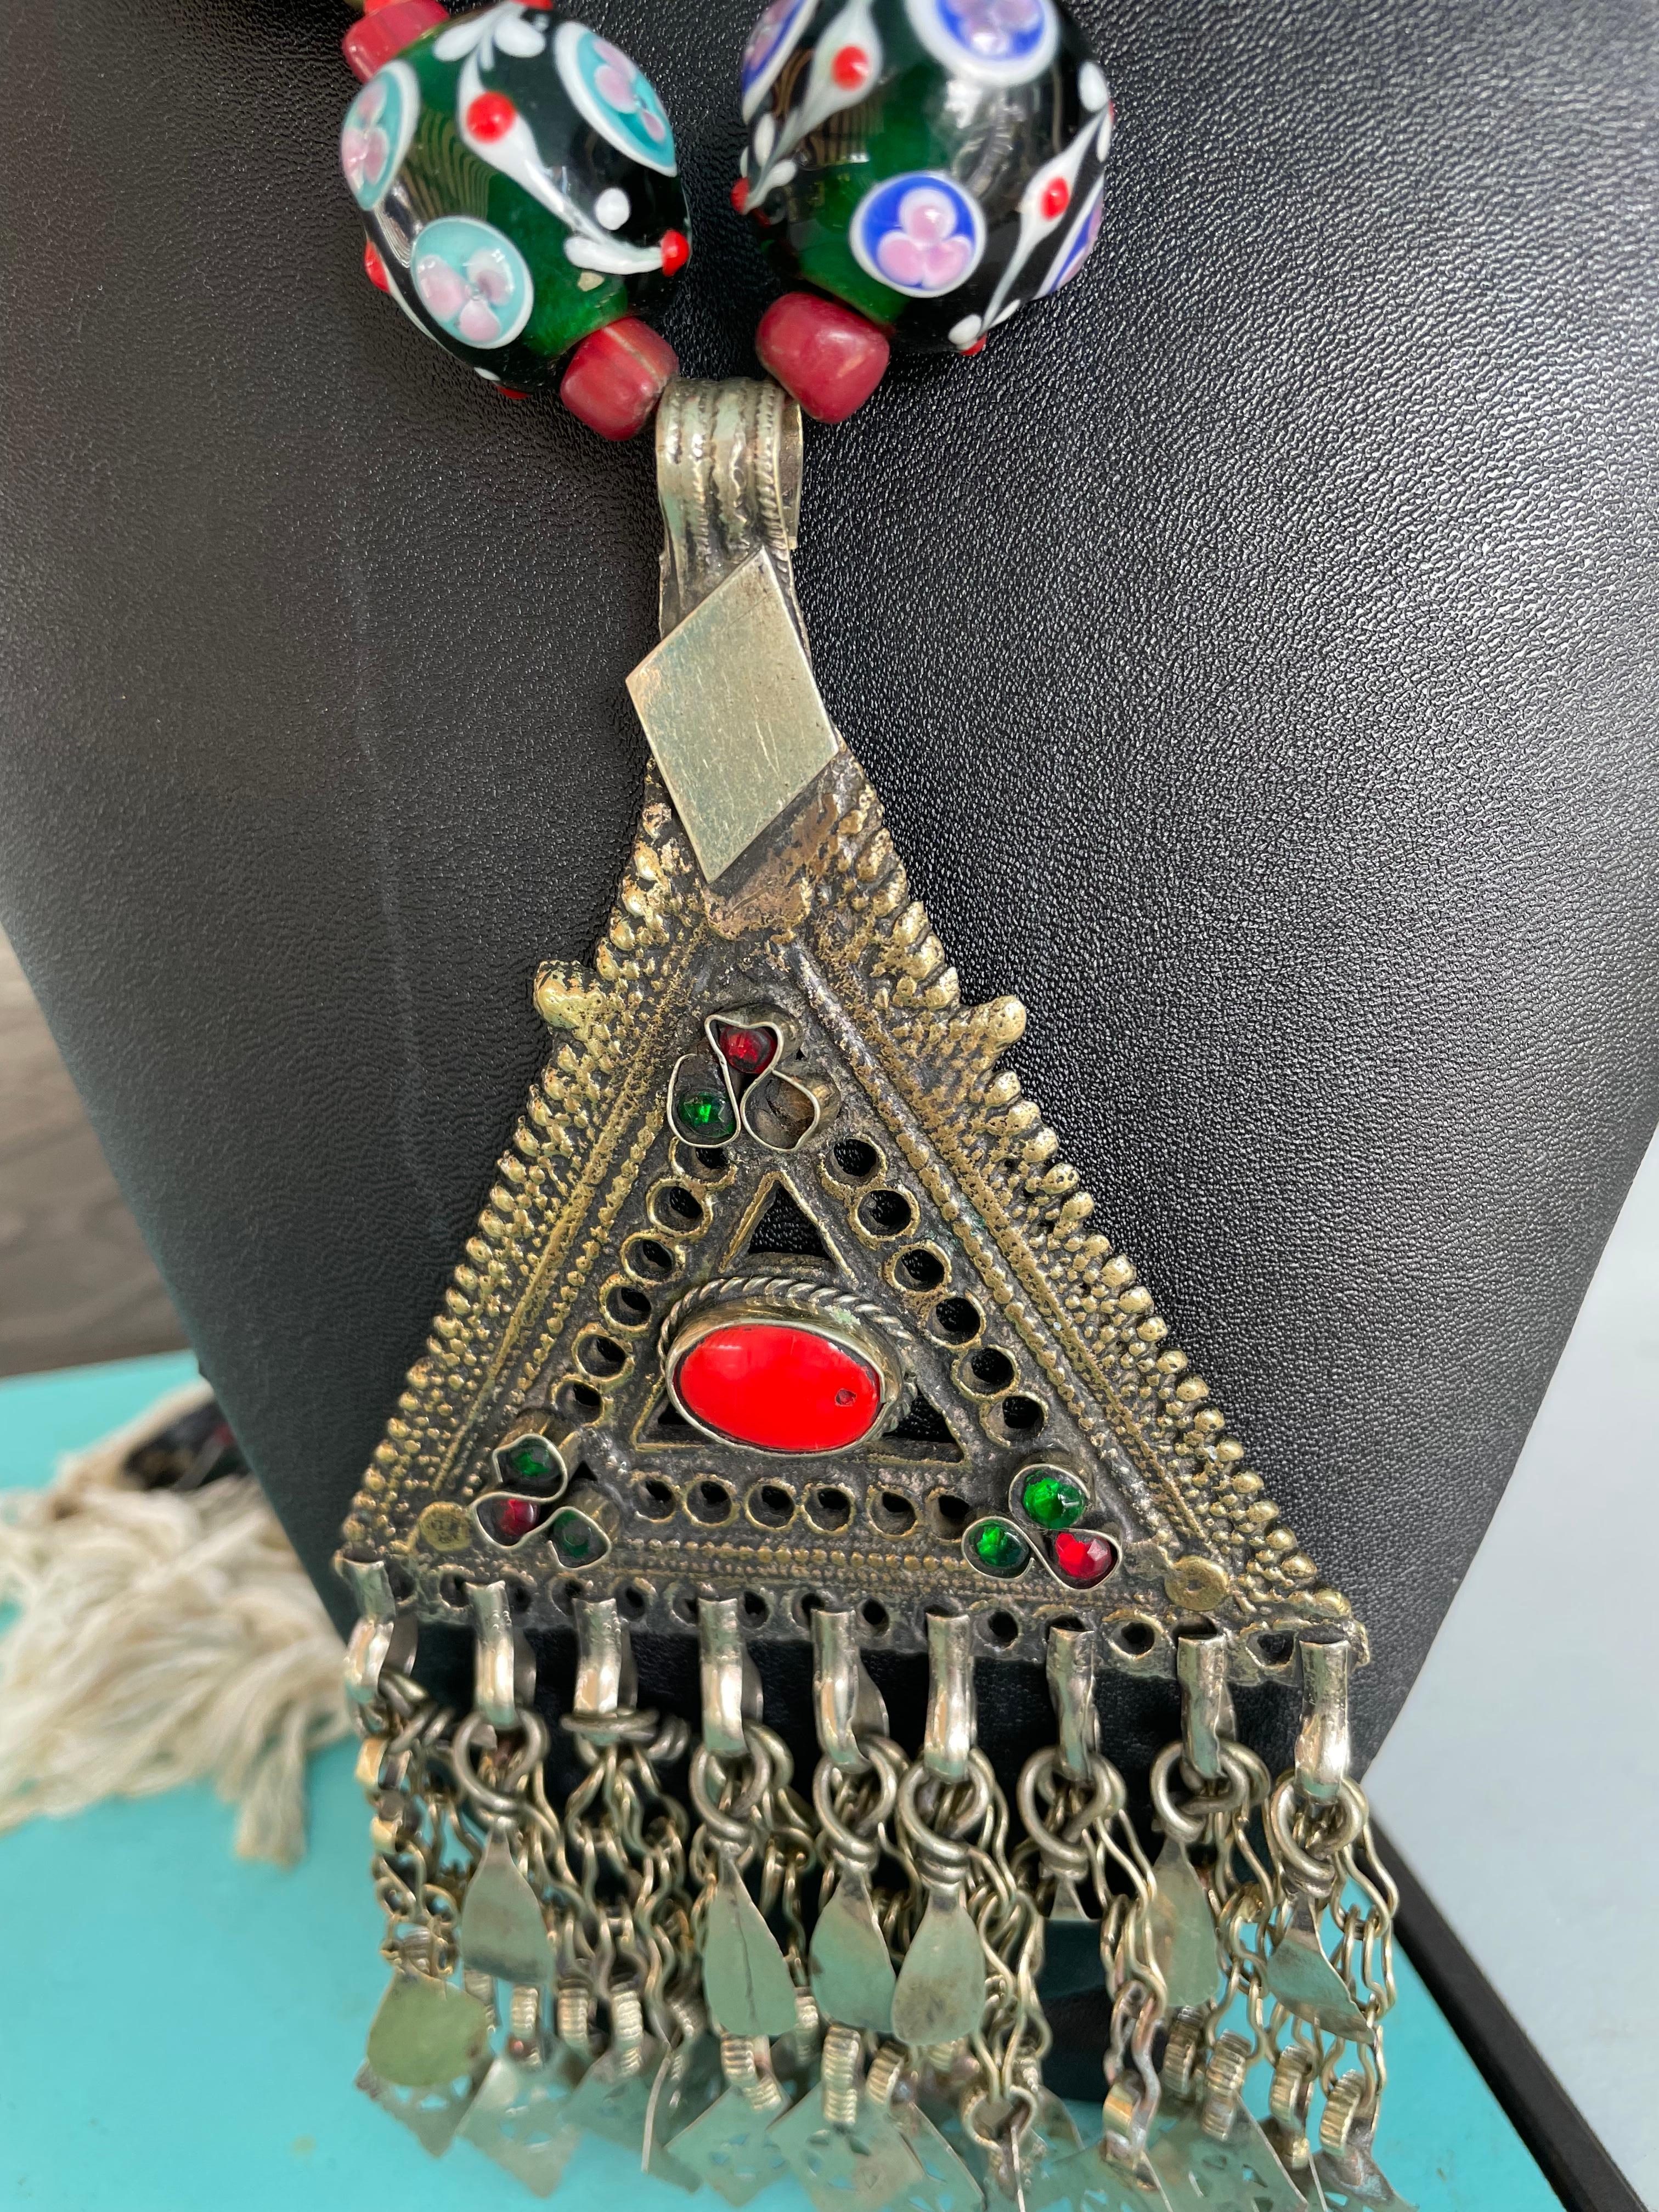 Lorraine’s Bijoux offers a one of a kind,handmade, statement necklace with a large vintage pendant from Afghanistan. This pendant has an inlaid coral stone and pieces of glass set into it.The beads consist of vintage hand painted ceramic beads also